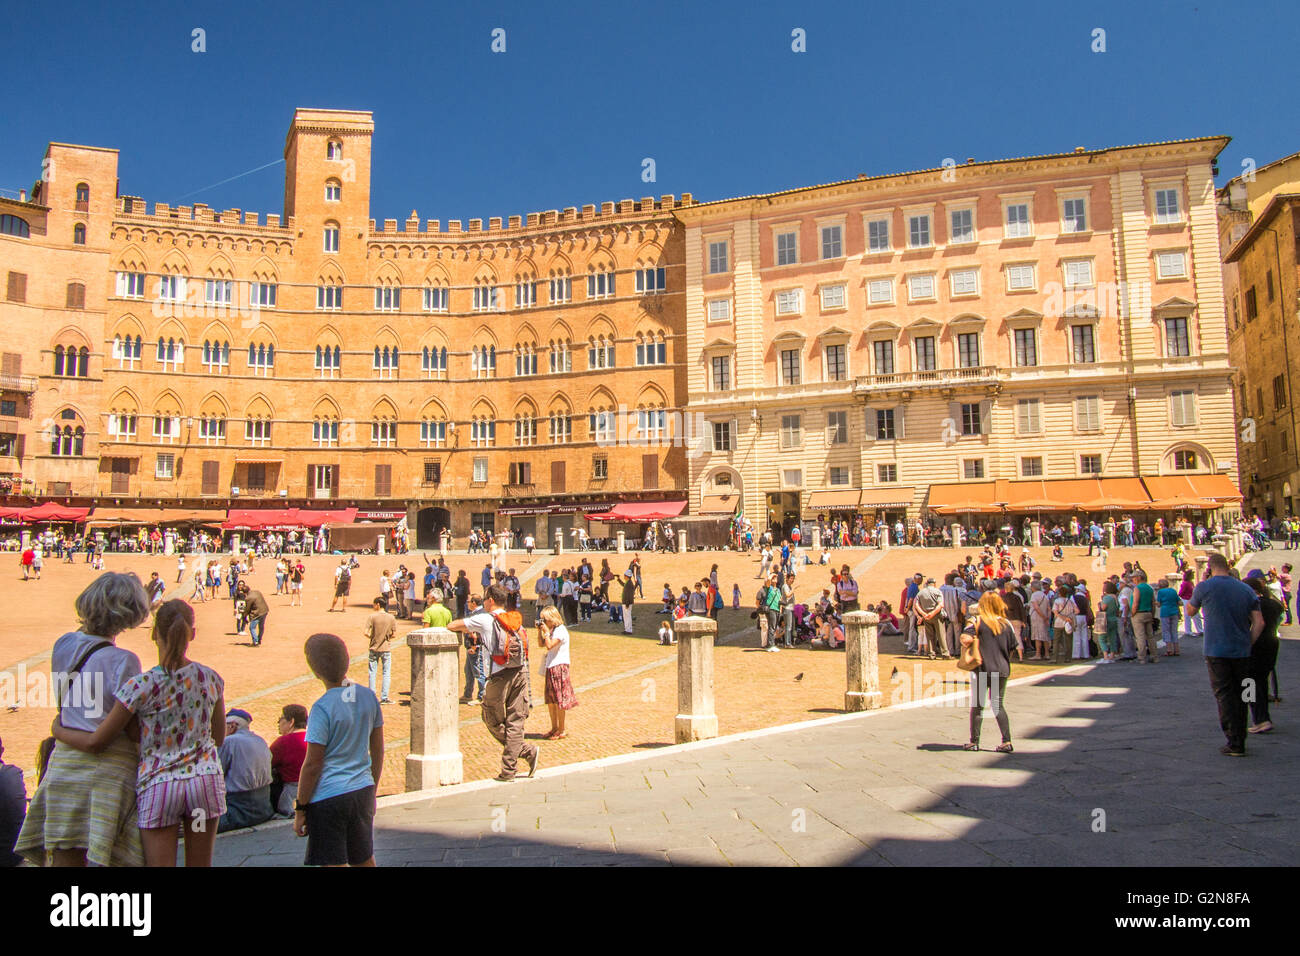 Architecture in 'Il Campo', a medieval Piazza in Siena, Tuscany, Italy Stock Photo